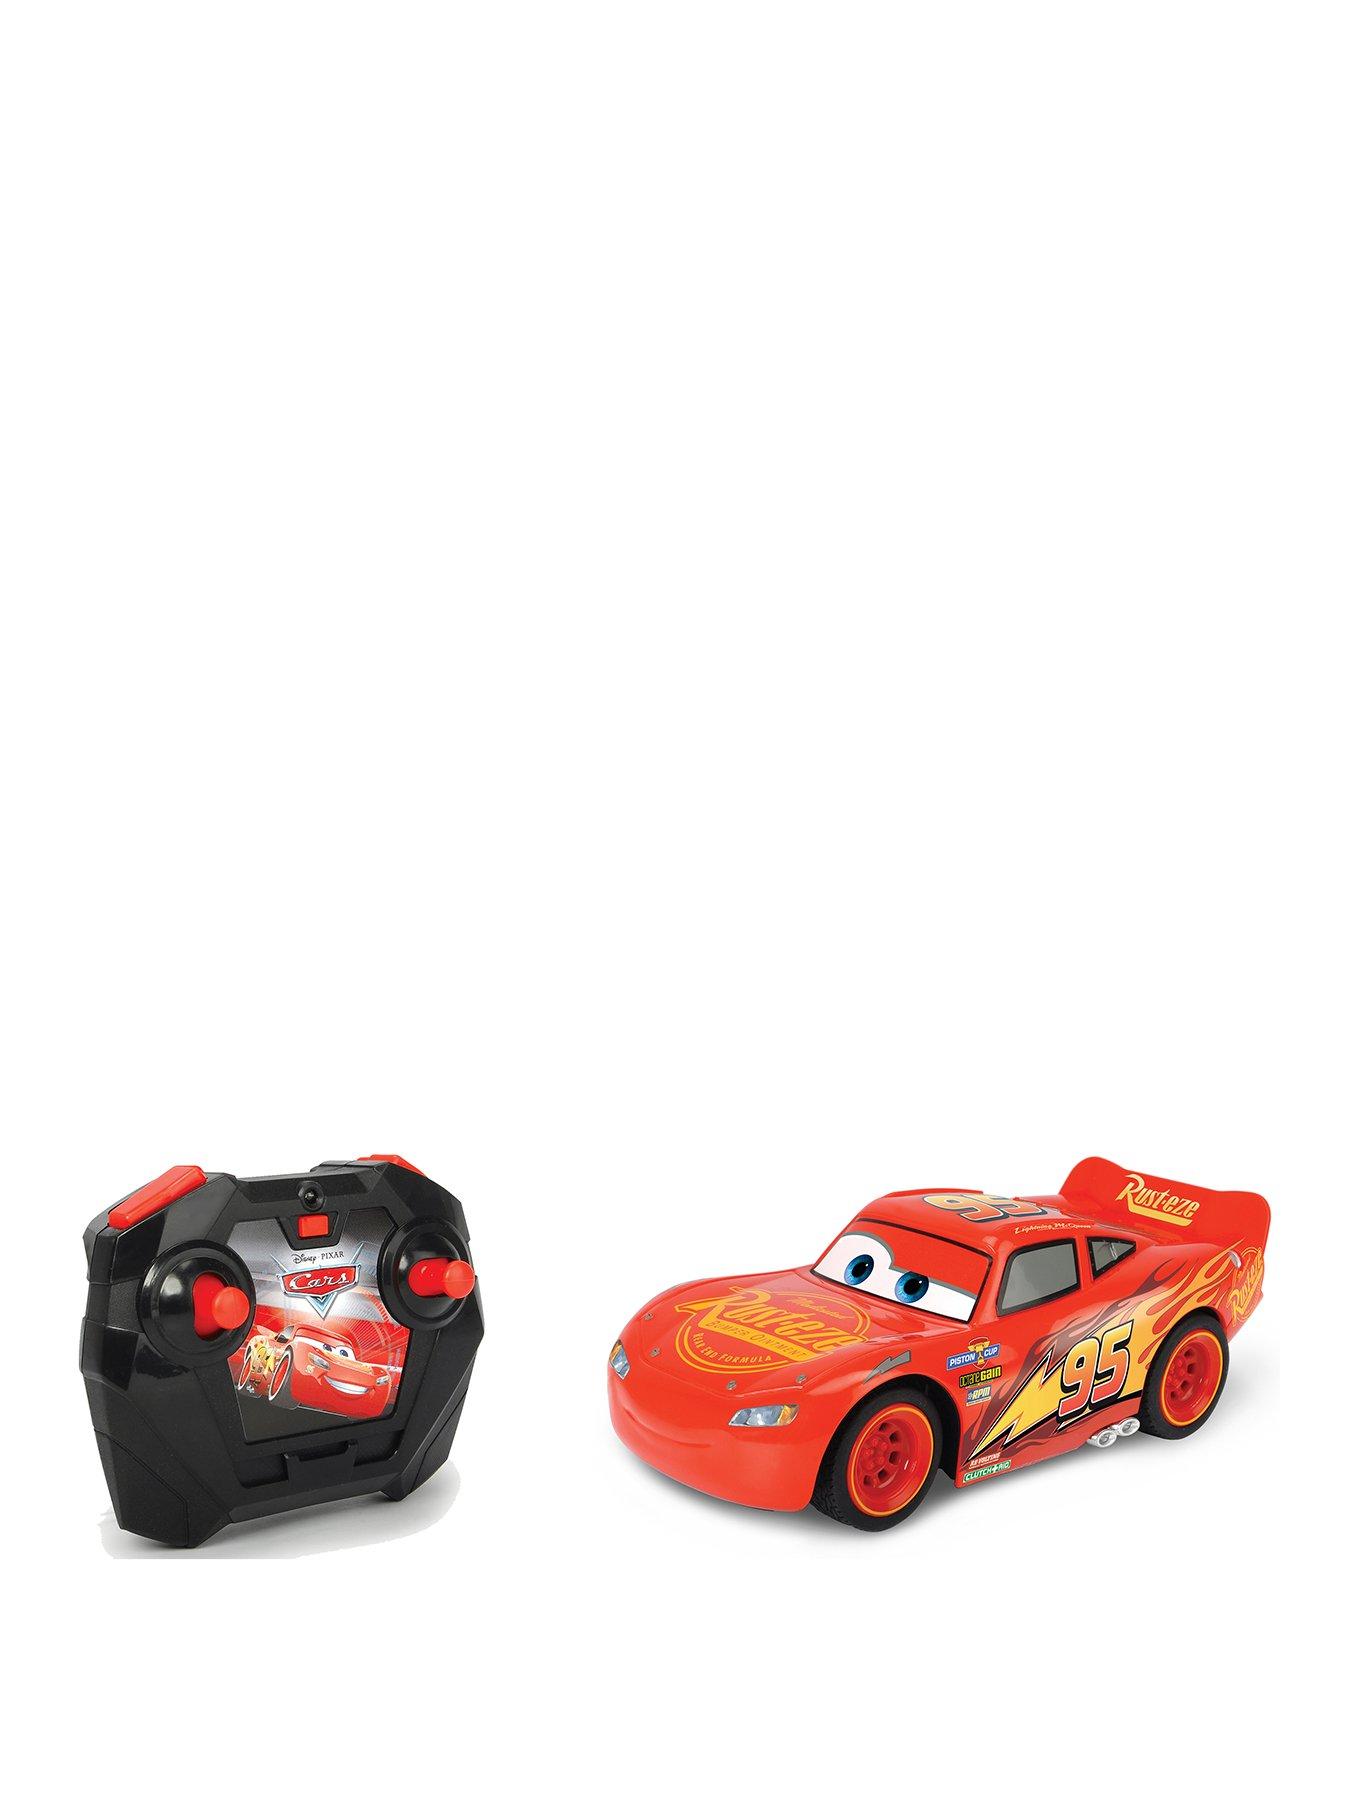 Hard Driver-Lightning McQueen: Trying to get inside the CPU of the Piston  Cup's hot rookie racer